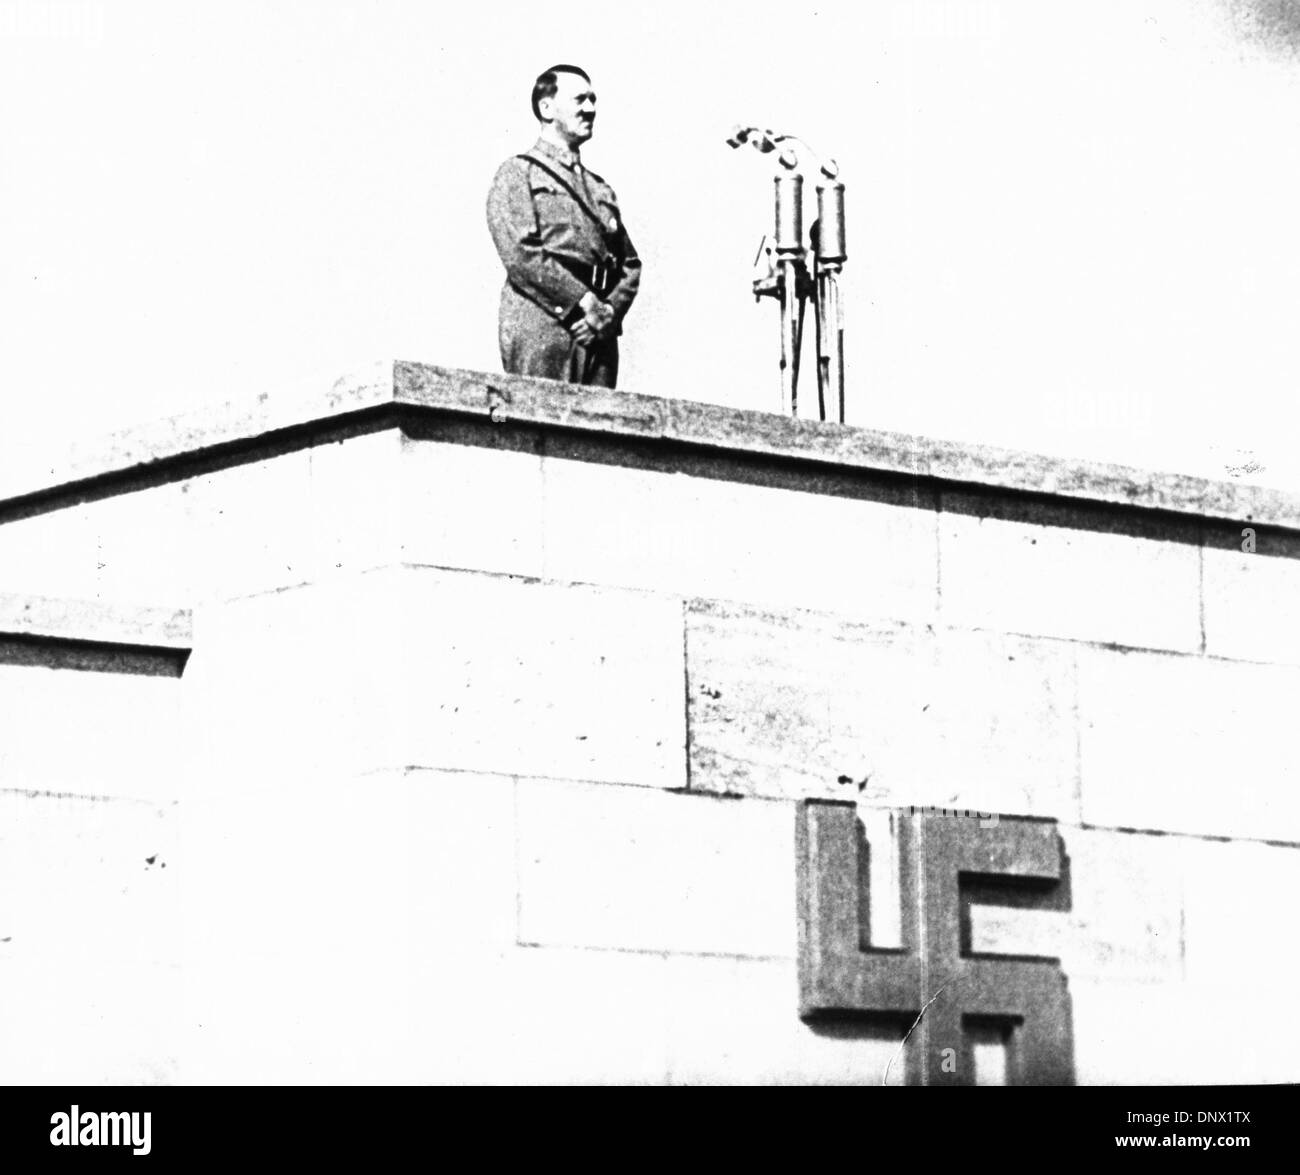 March 22, 1936 - Nuremberg, Bavaria, Germany - ADOLF HITLER Imperial Chancellor of Germany and the leader of the Nazi Party speaking at a Nuremberg Party Rally. Adolf Hitler (April 20, 1889ÐApril 30, 1945) was the Fuhrer und Reichskanzler (Leader and Imperial chancellor) of Germany from 1933 to his death. He was leader of the National Socialist German Workers Party (NSDAP), better  Stock Photo